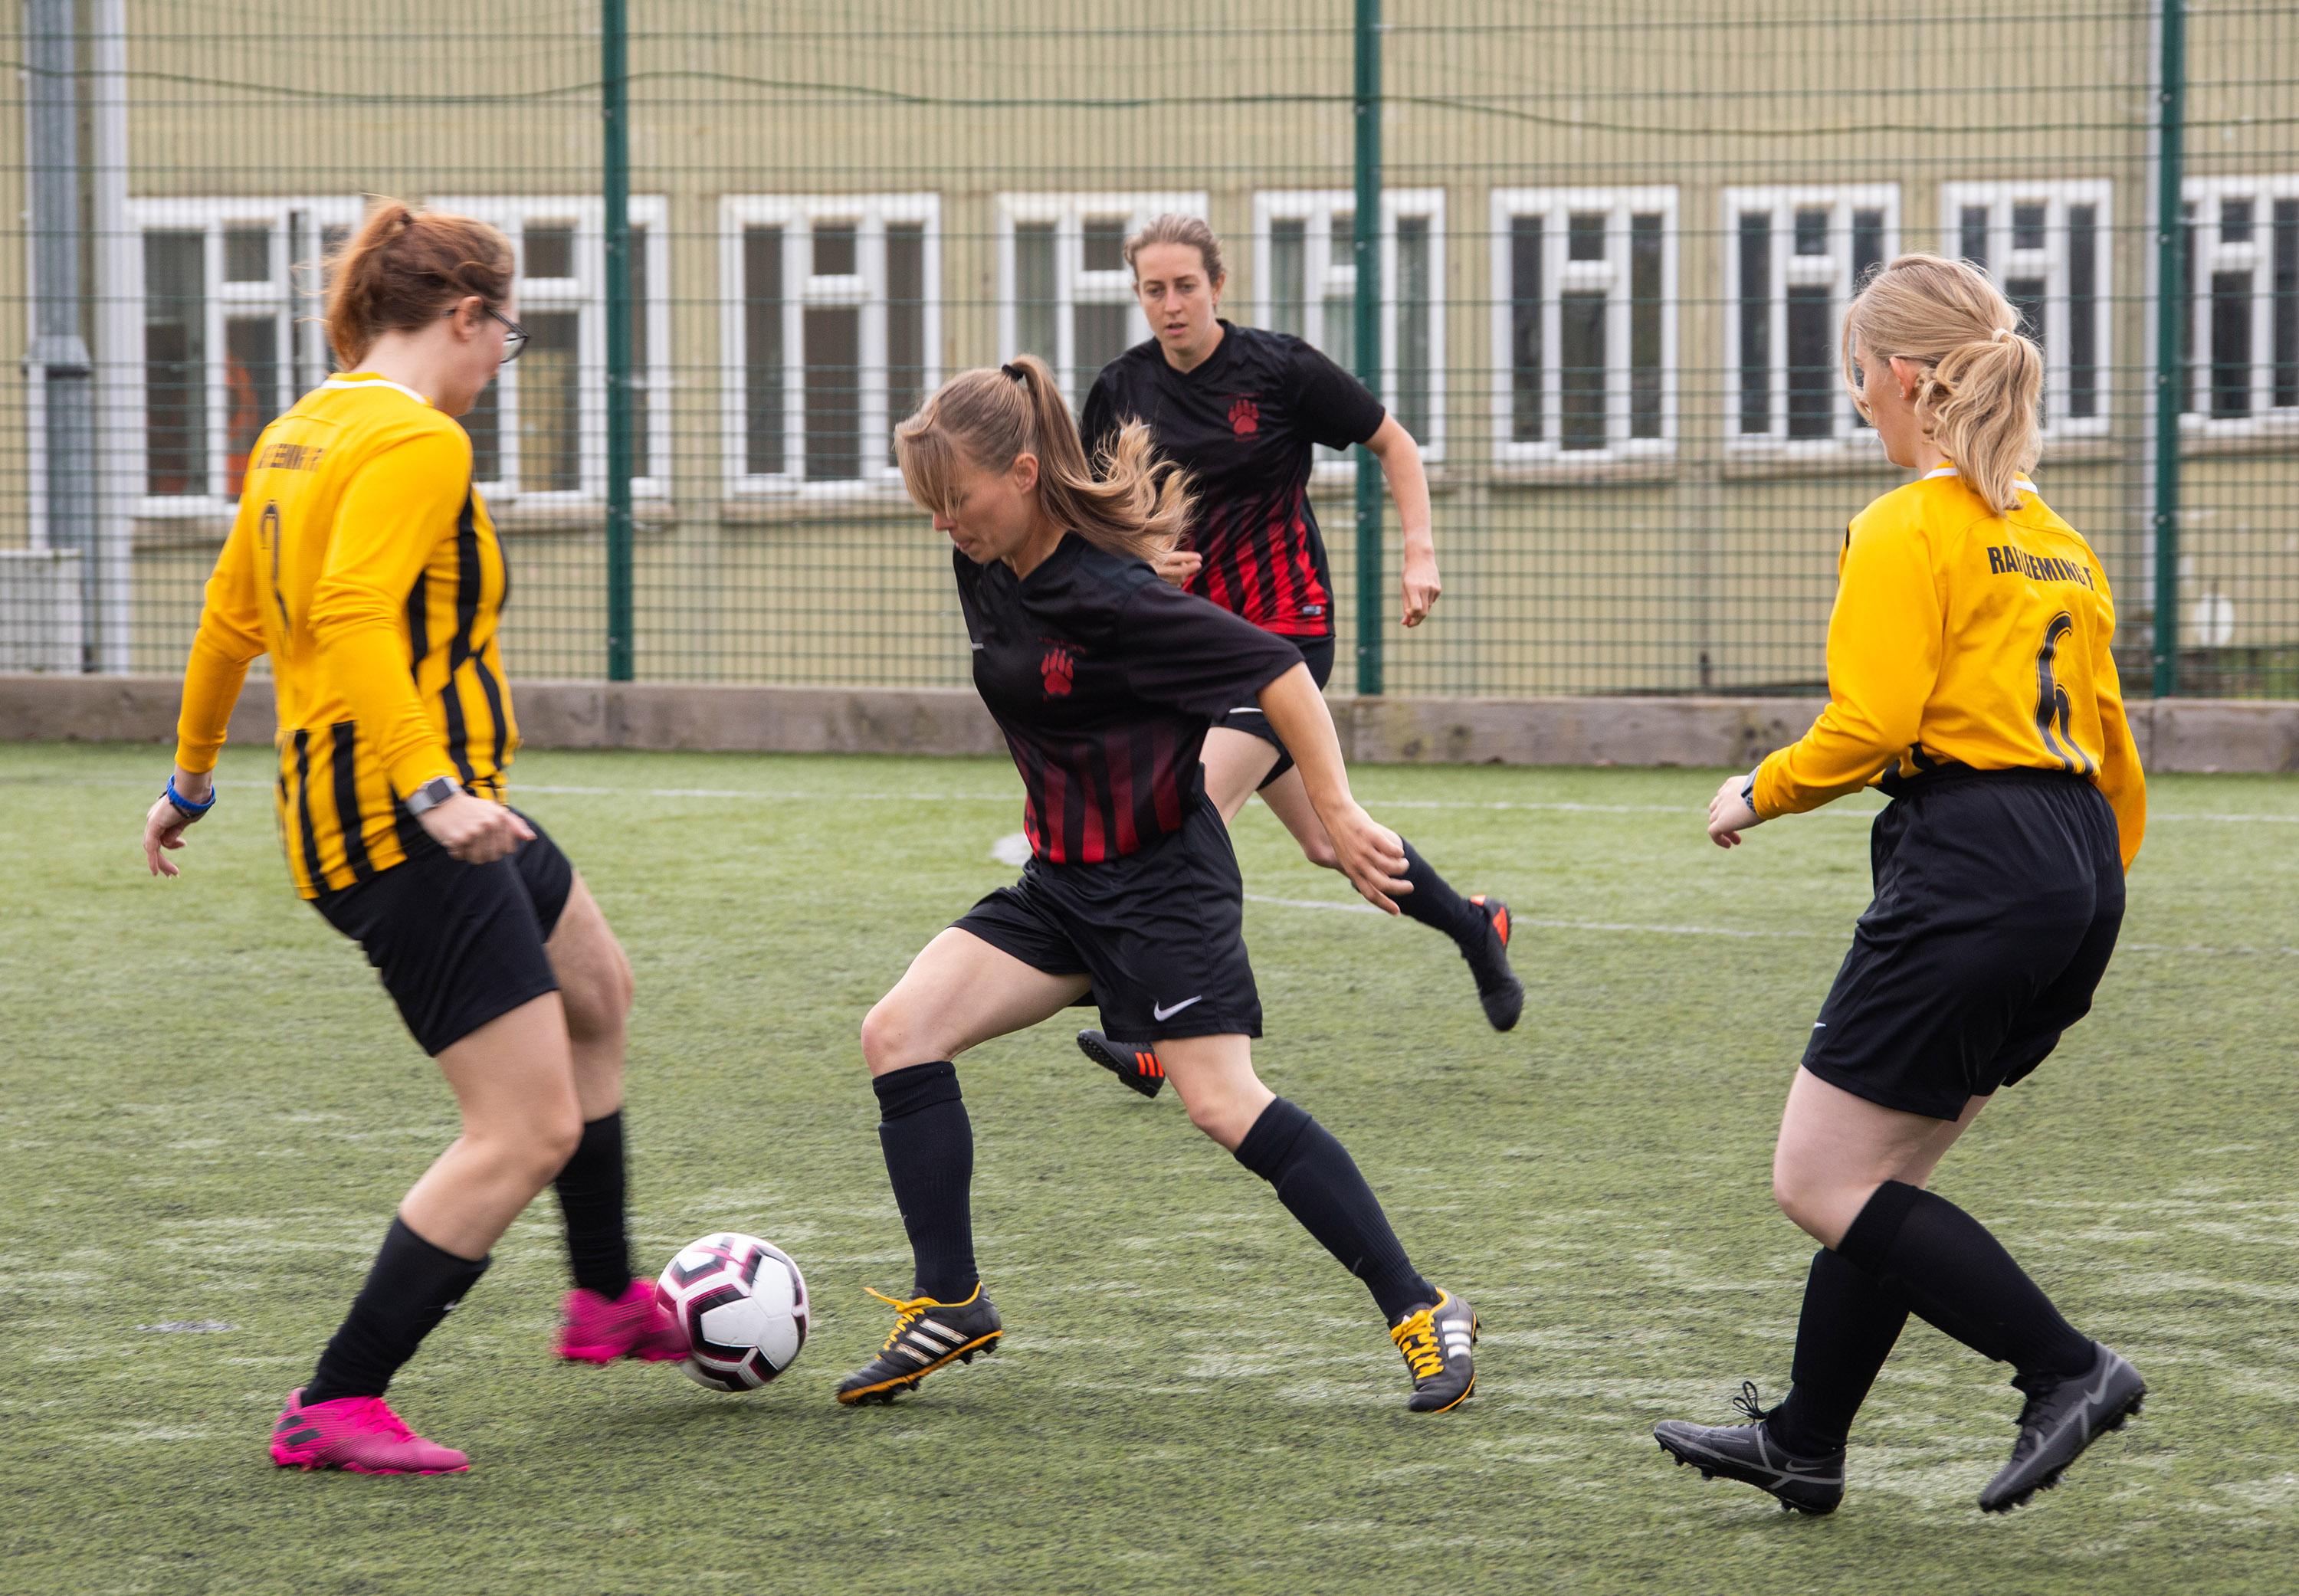 RAF Brize Norton Female 5-a-side 2021 - Players compete for the ball